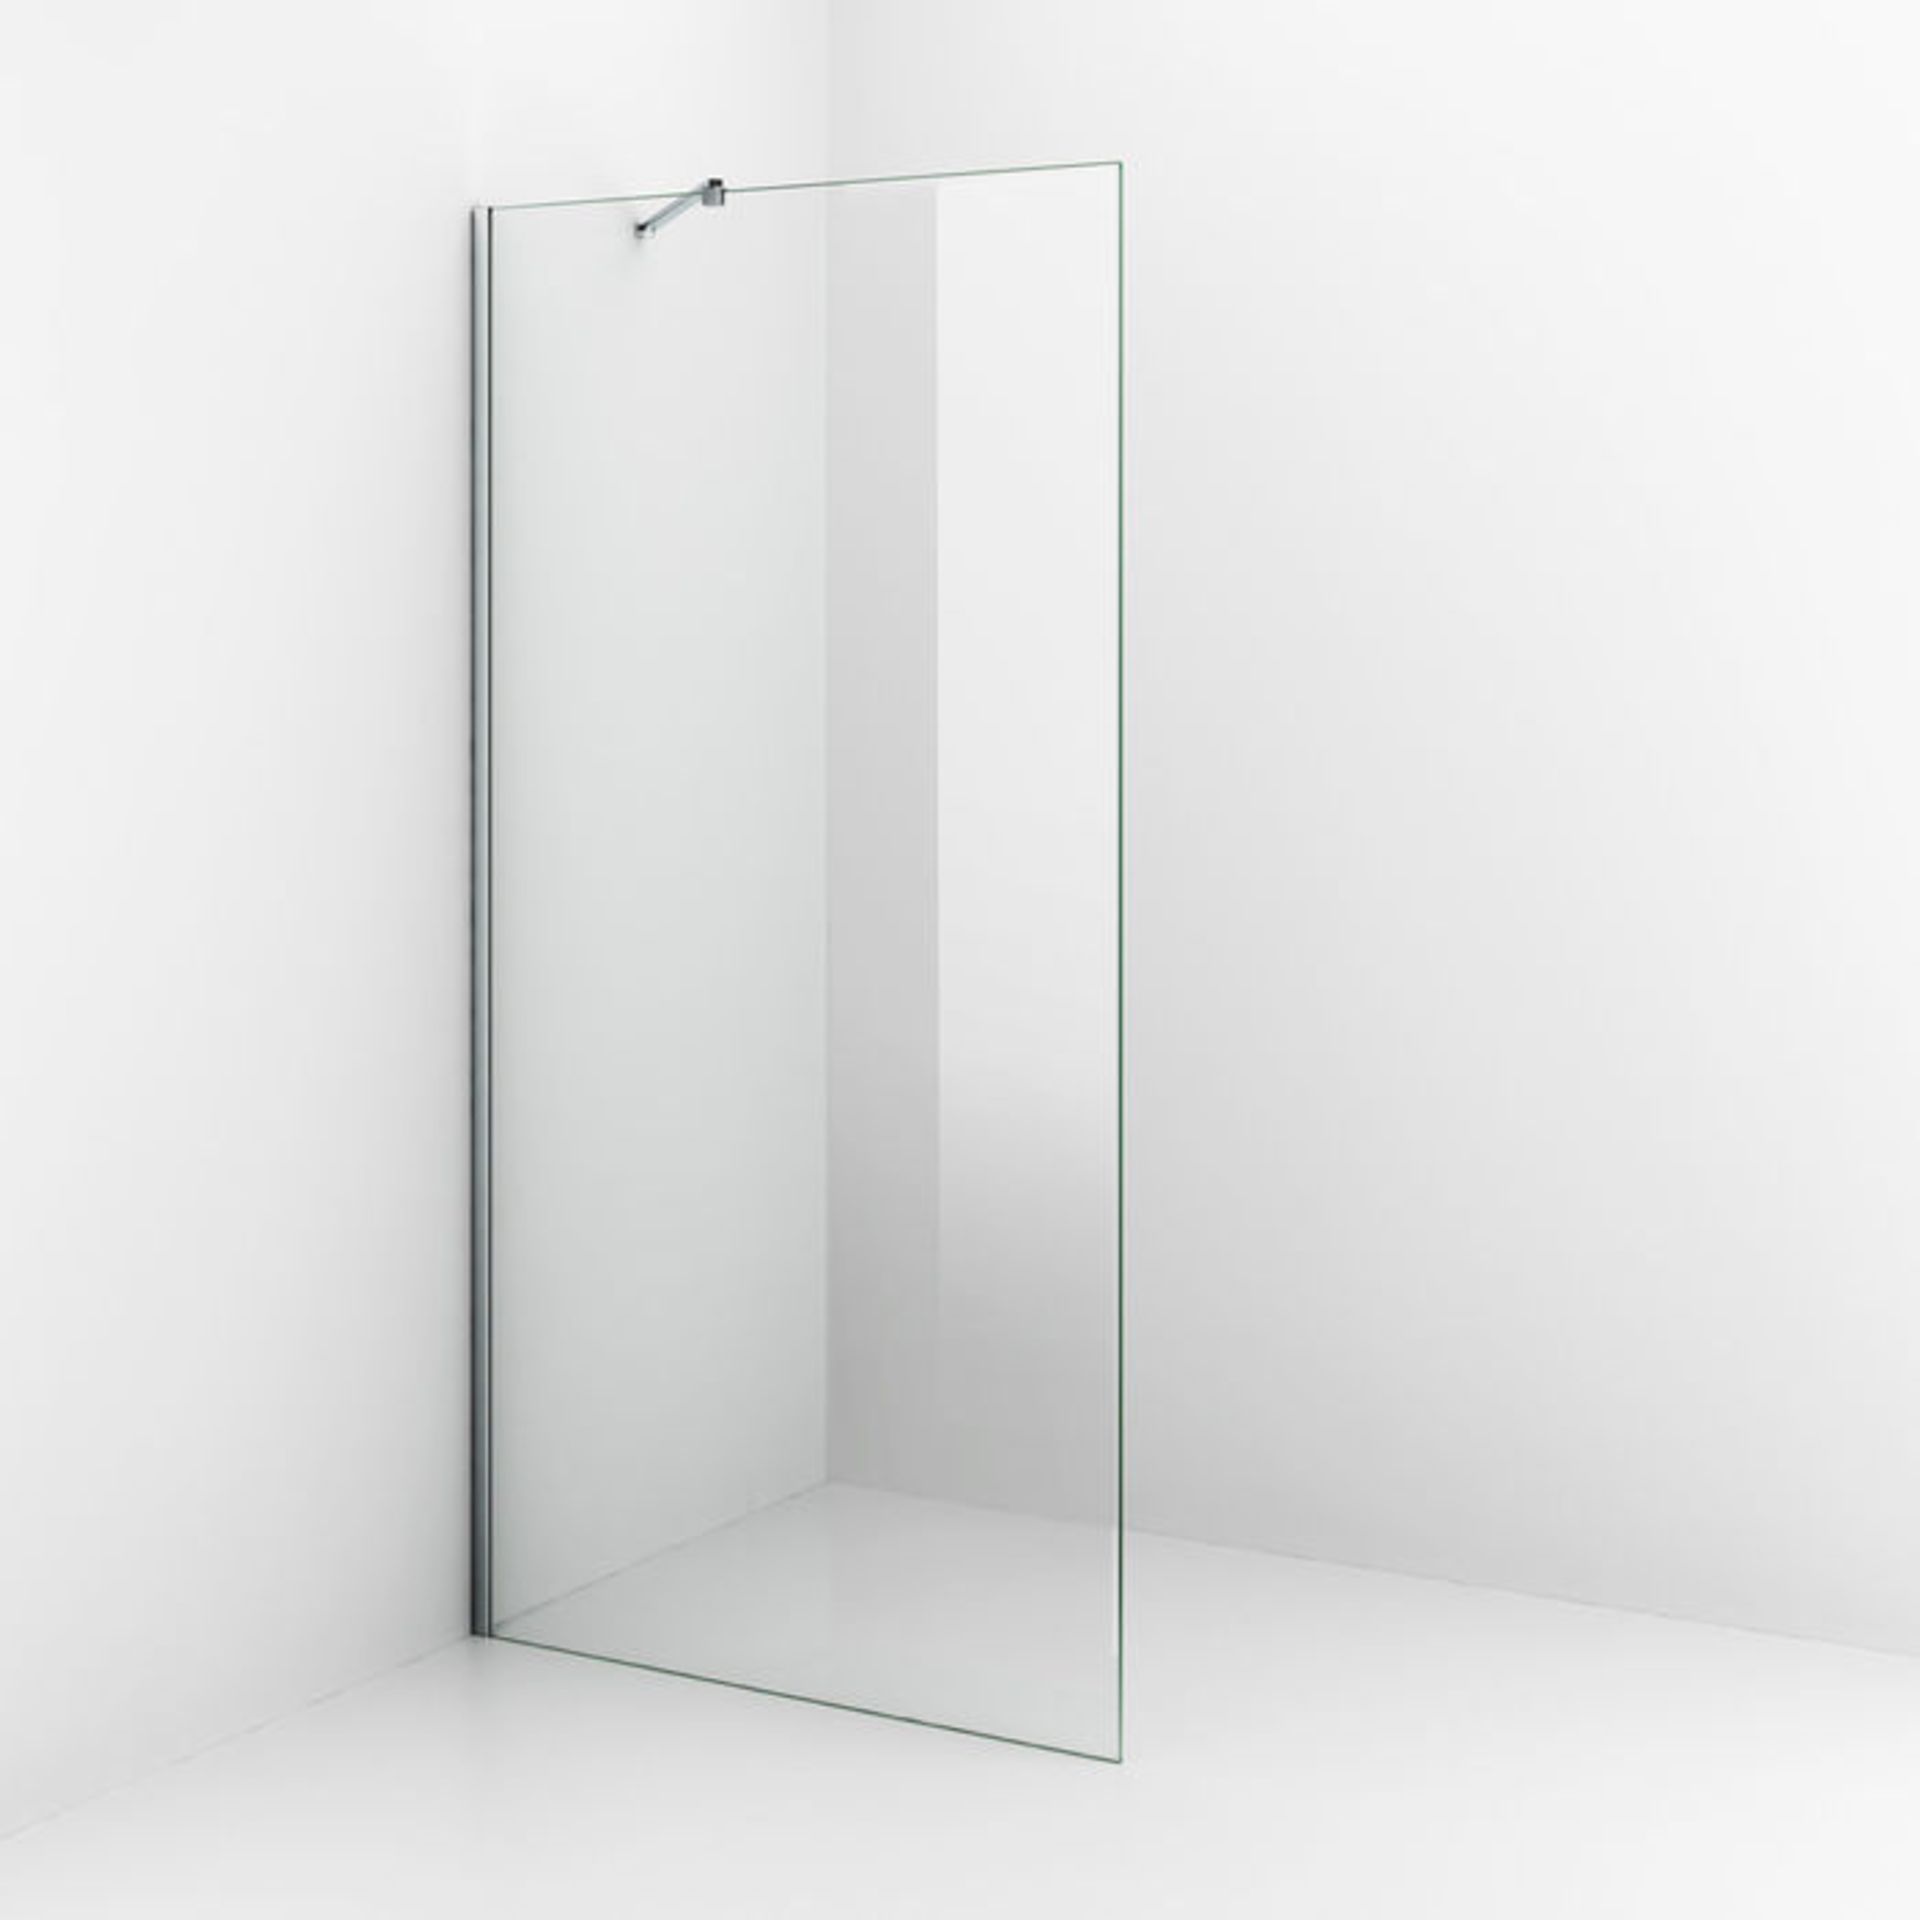 NEW (L127) 900mm - 8mm - Premium EasyClean Wetroom Panel. RRP £349.99.8mm EasyClean glass - Ou... - Image 3 of 3